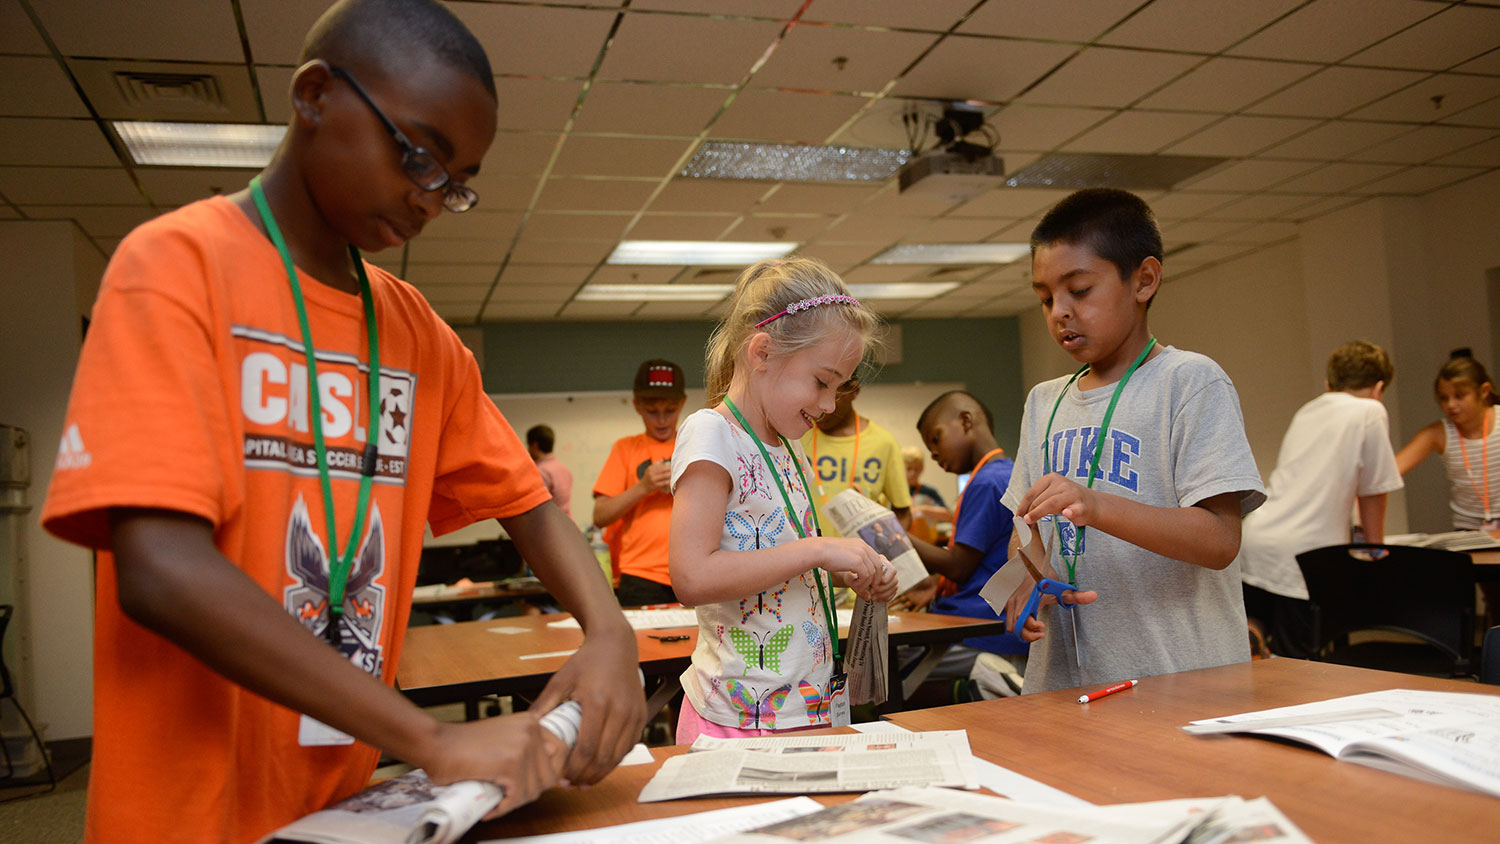 Elementary school campers make furniture from newspapers.